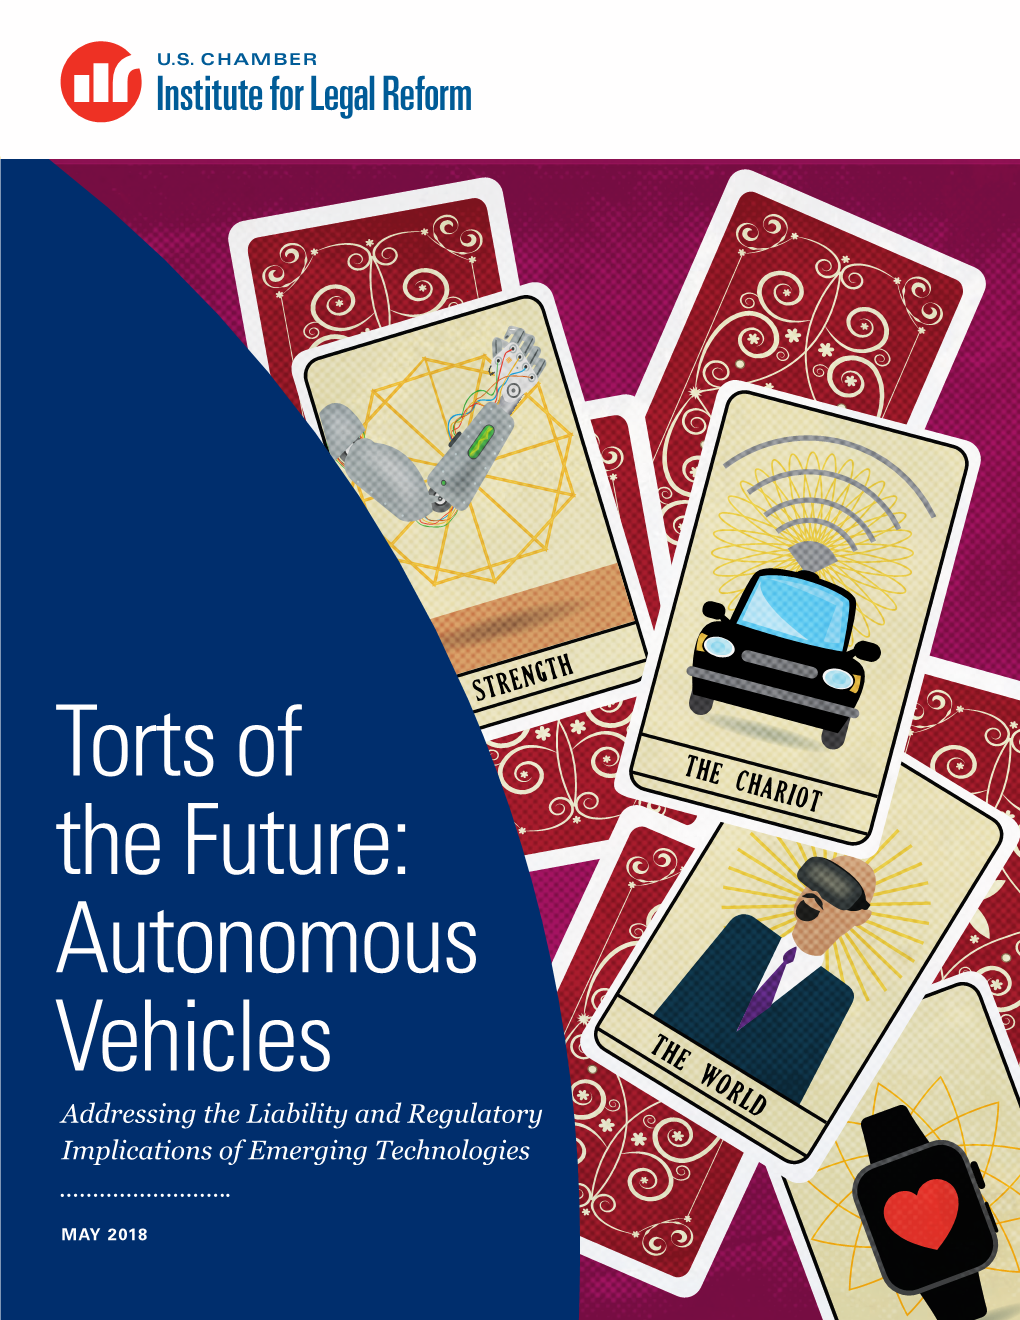 Torts of the Future: Autonomous Vehicles Addressing the Liability and Regulatory Implications of Emerging Technologies